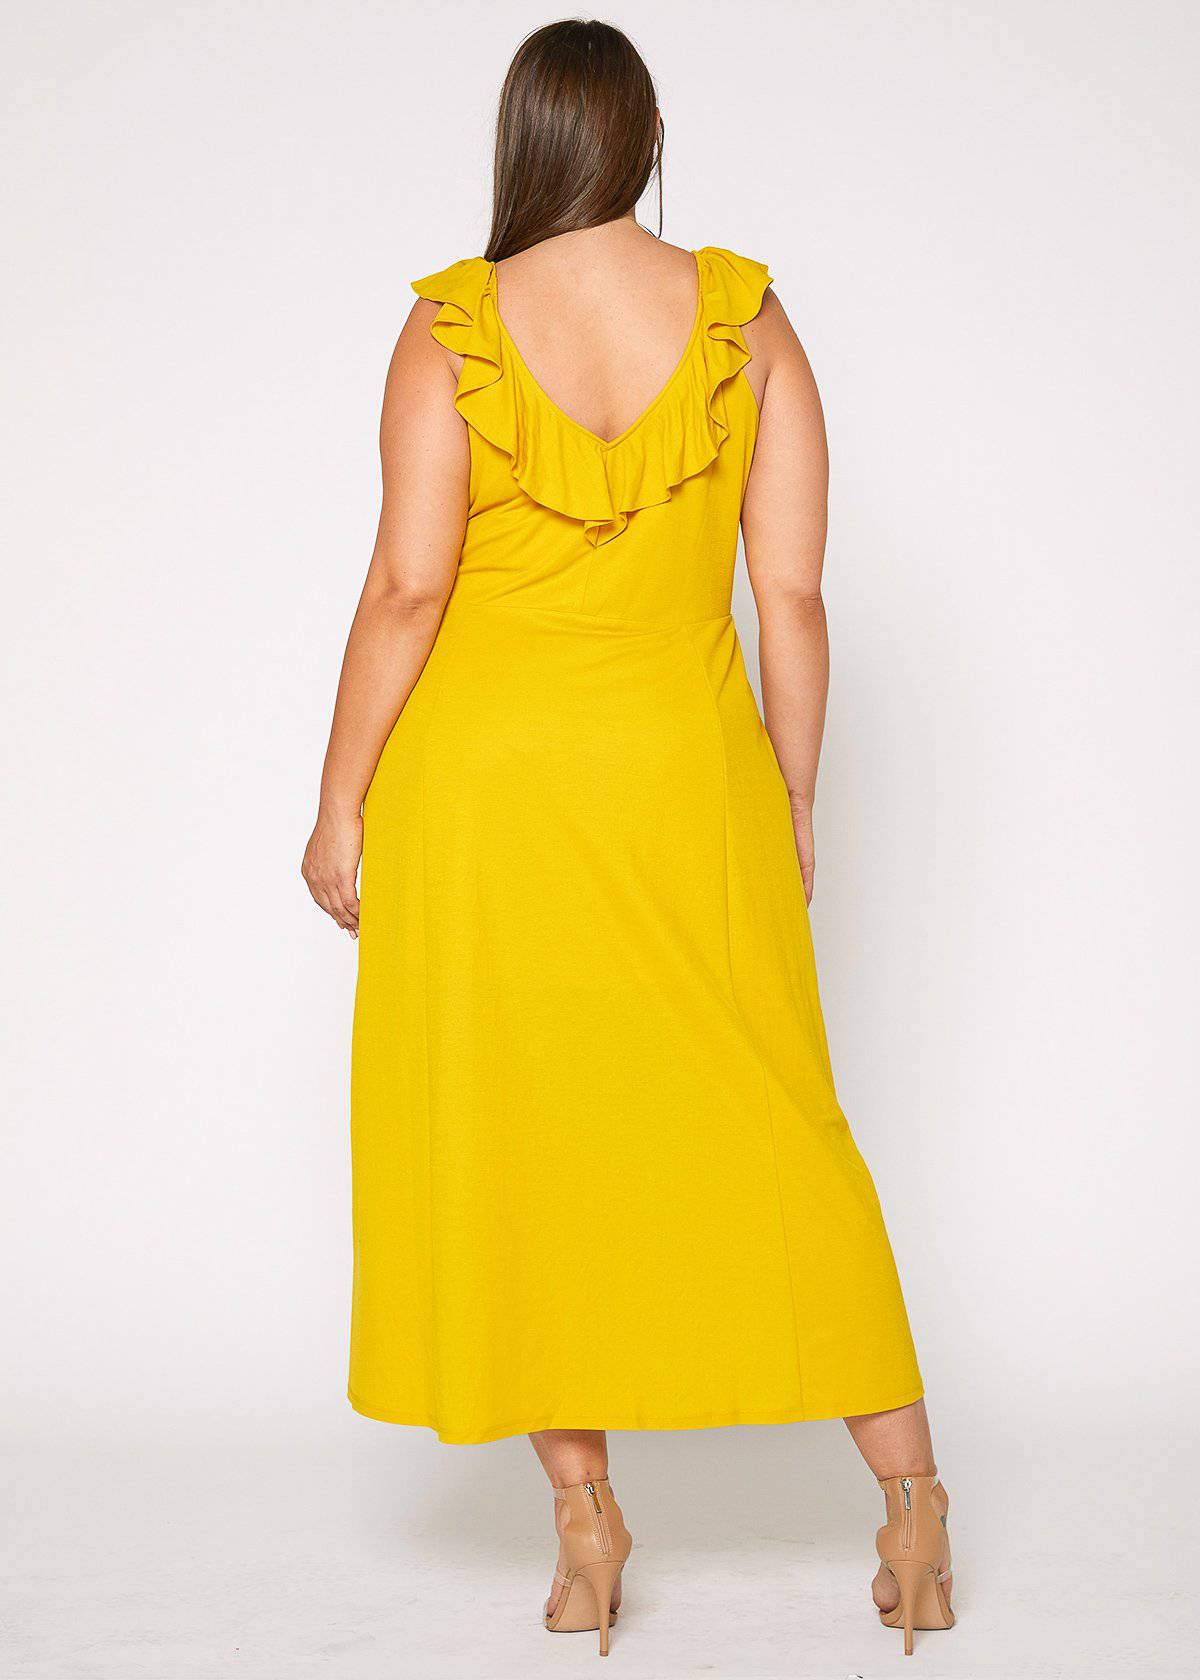 Plus Size Ruffle Trim Wrapped Maxi Dress in Mustard by Shop at Konus